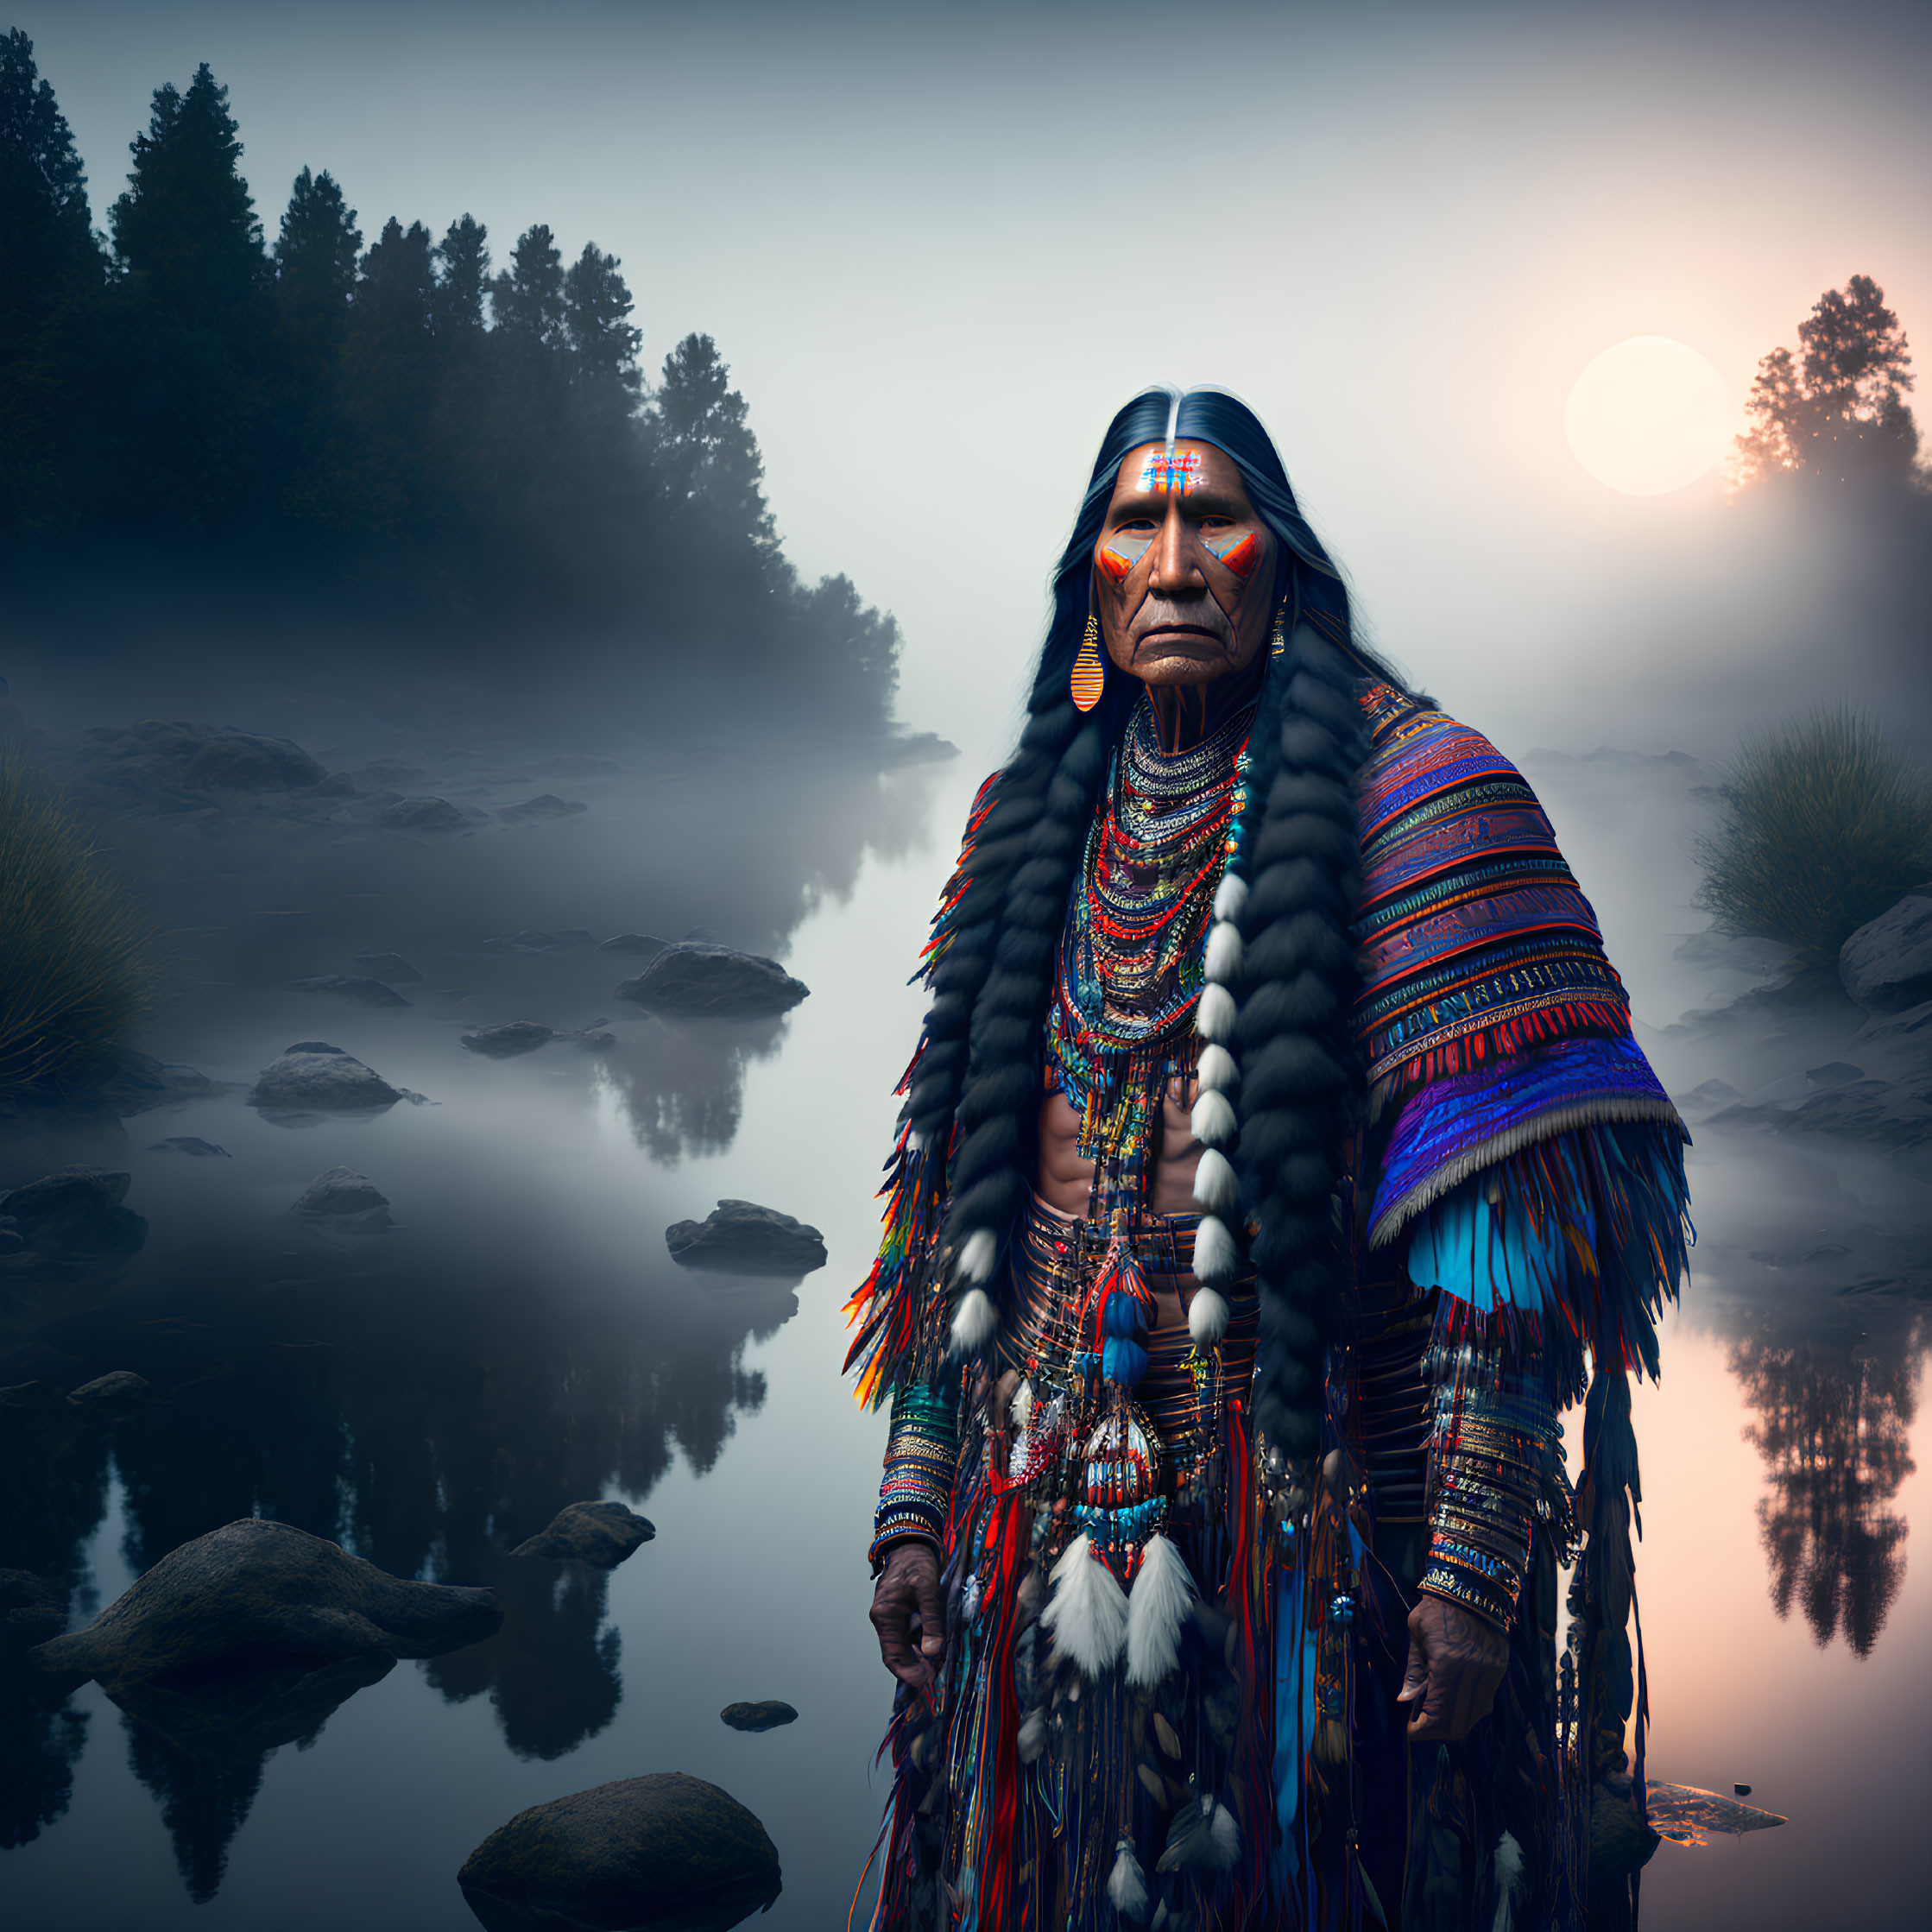 Indigenous Man in Traditional Attire by Misty River at Dusk